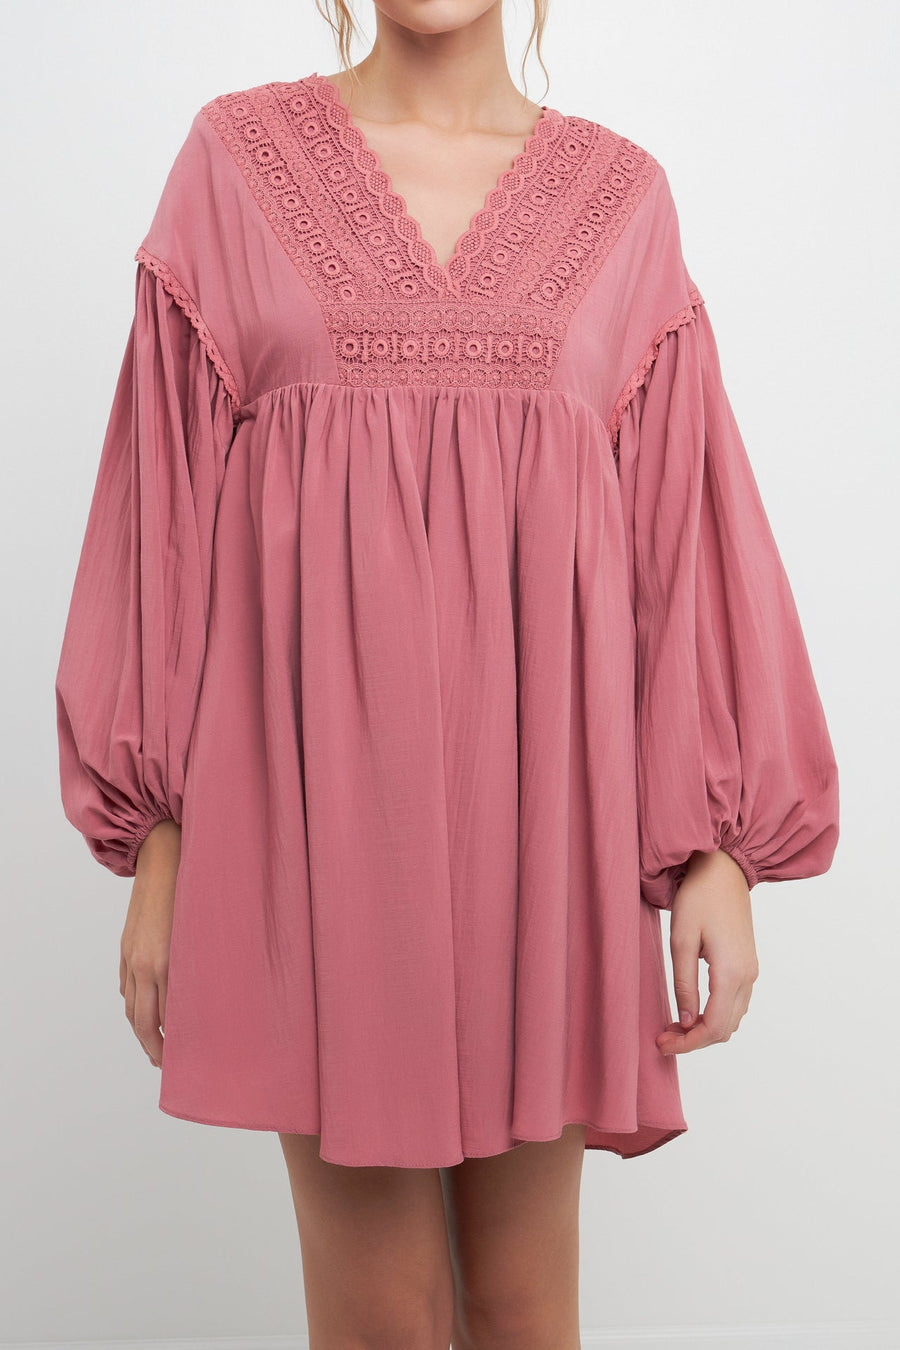 FREE THE ROSES-Laced Blouson Sleeve Shift Dress-DRESSES available at Objectrare